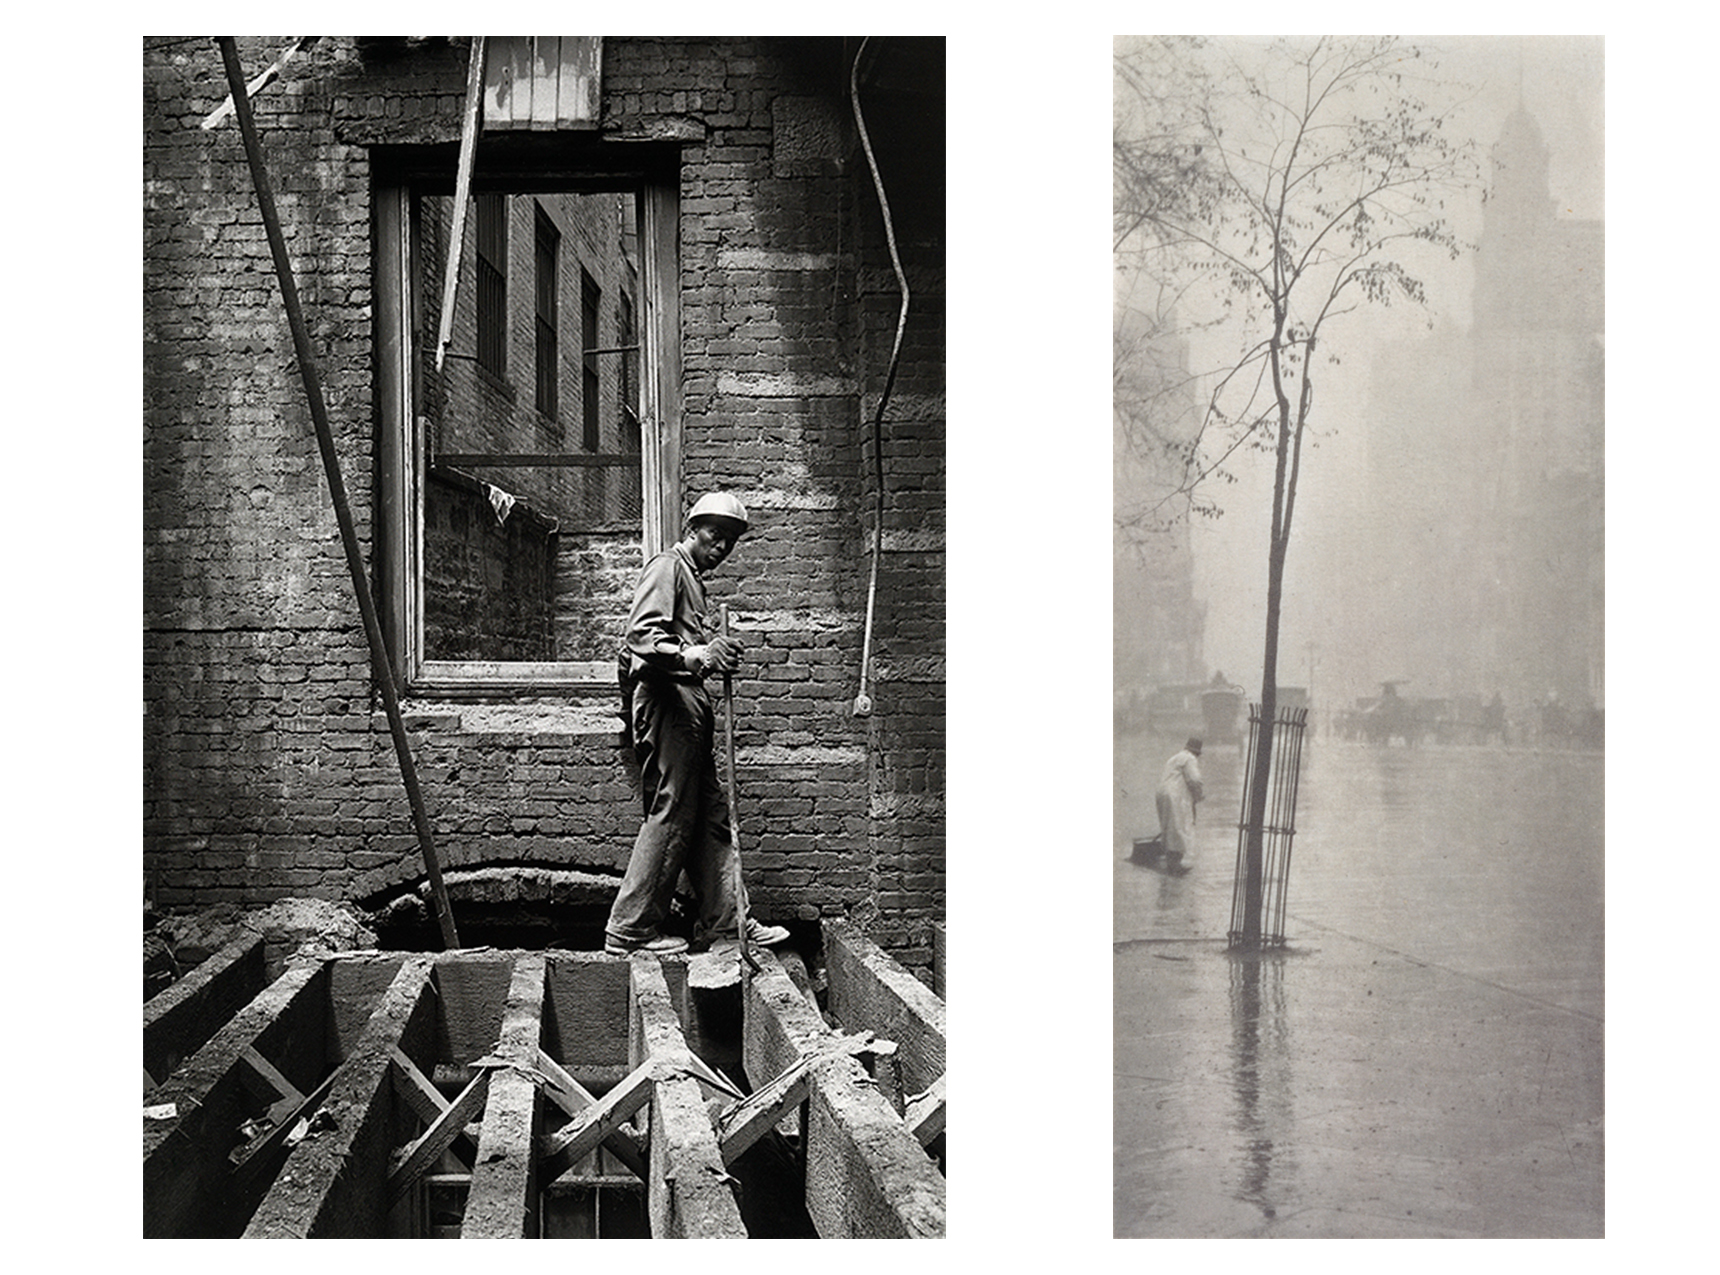 left: Man in work clothes and hard hat standing on support beams in front of a window inside partially demolished building. right: rainy day with slender tree on city sidewalk, reflection of trunk visible on sidewalk in foreground, figure sweeping street in middle ground